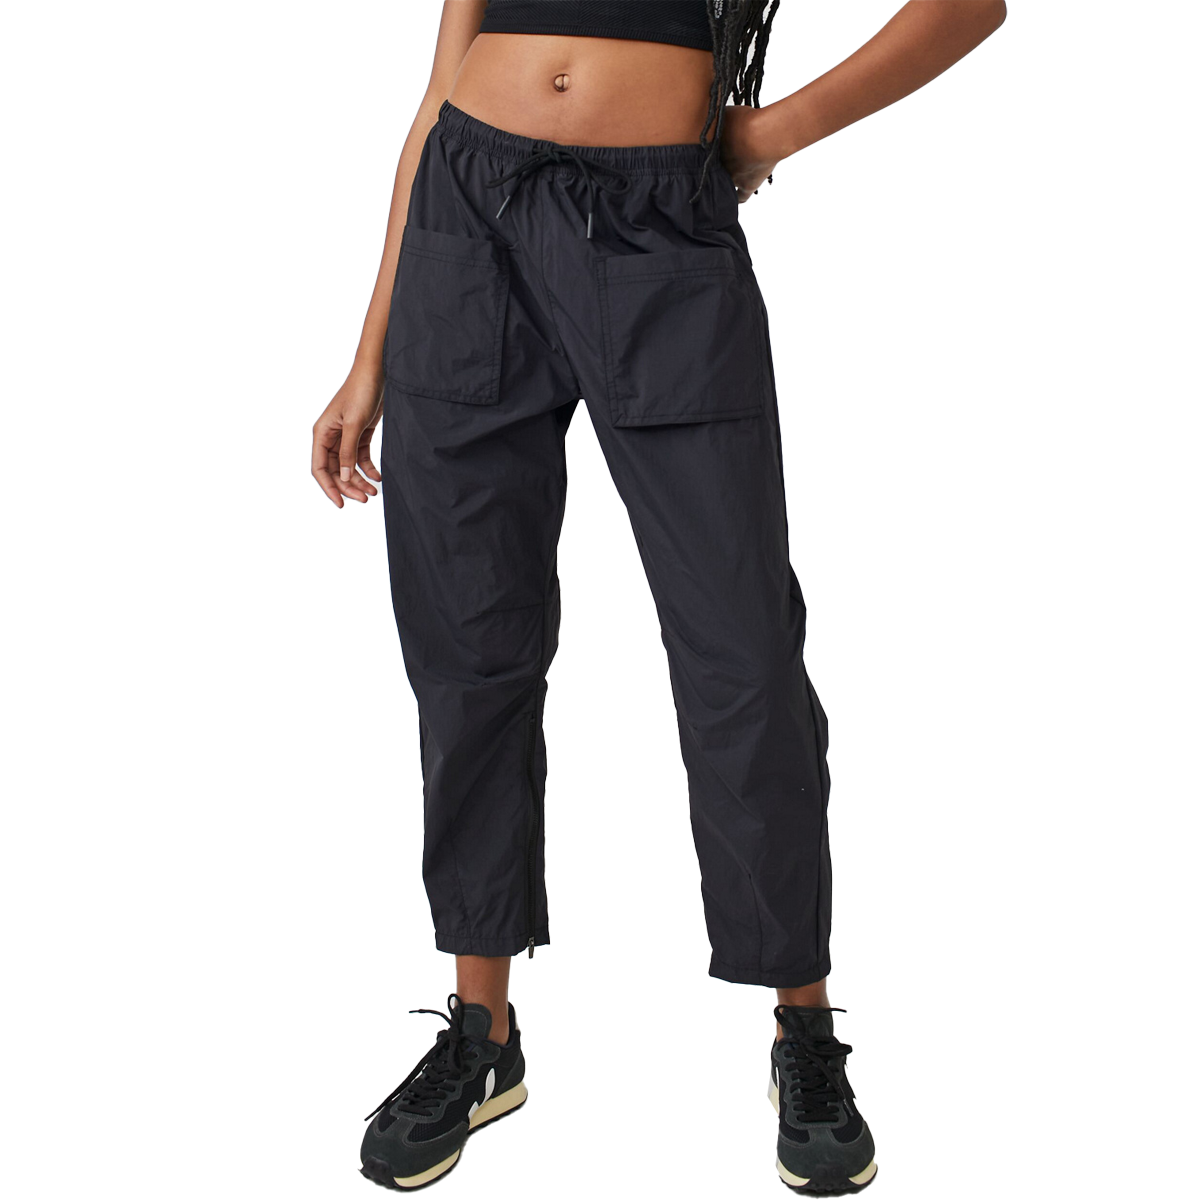 Women's Fly By Night Pant alternate view